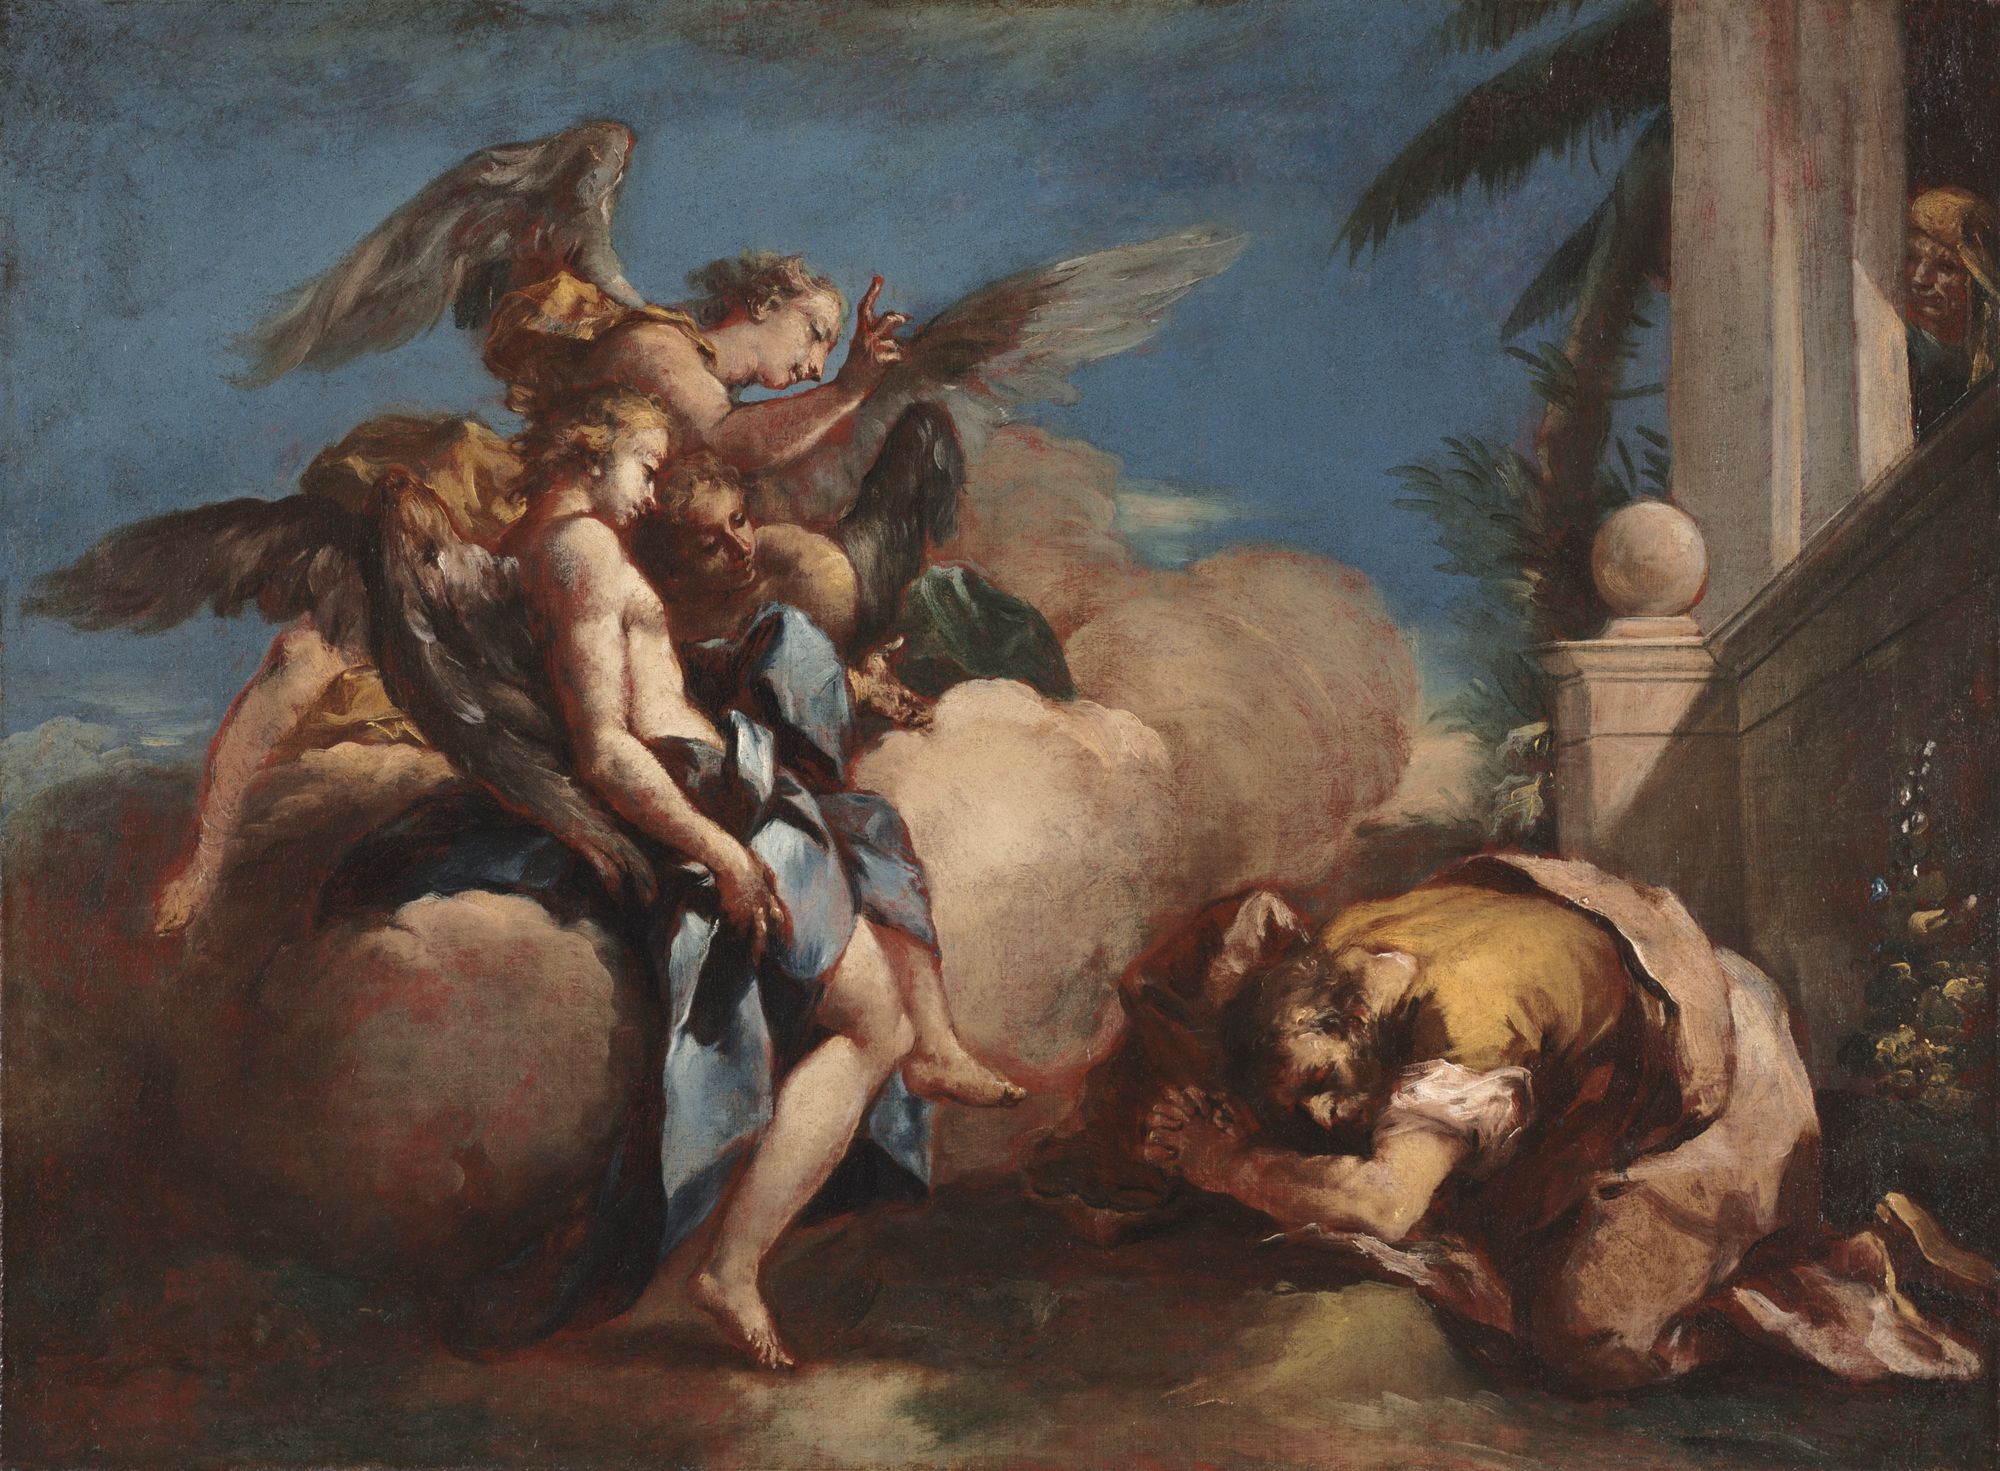 The Angels Appearing to Abraham (1750s) by Francesco Guardi - Public Domain Bible Painting